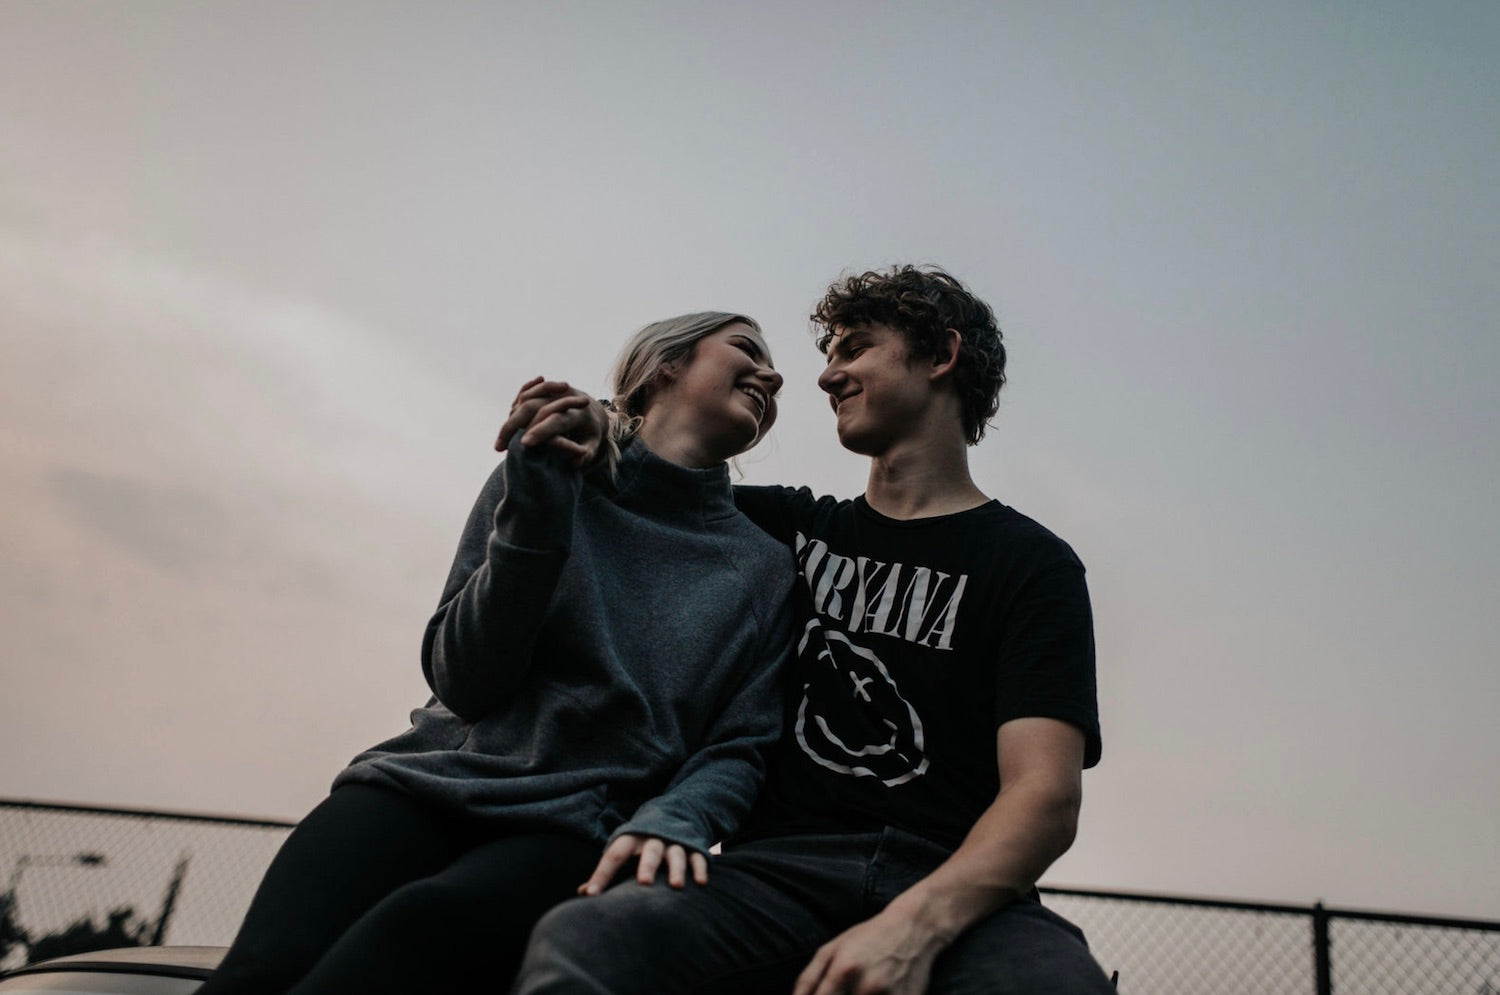 A couple smile at each other as they sit on bleachers at twilight